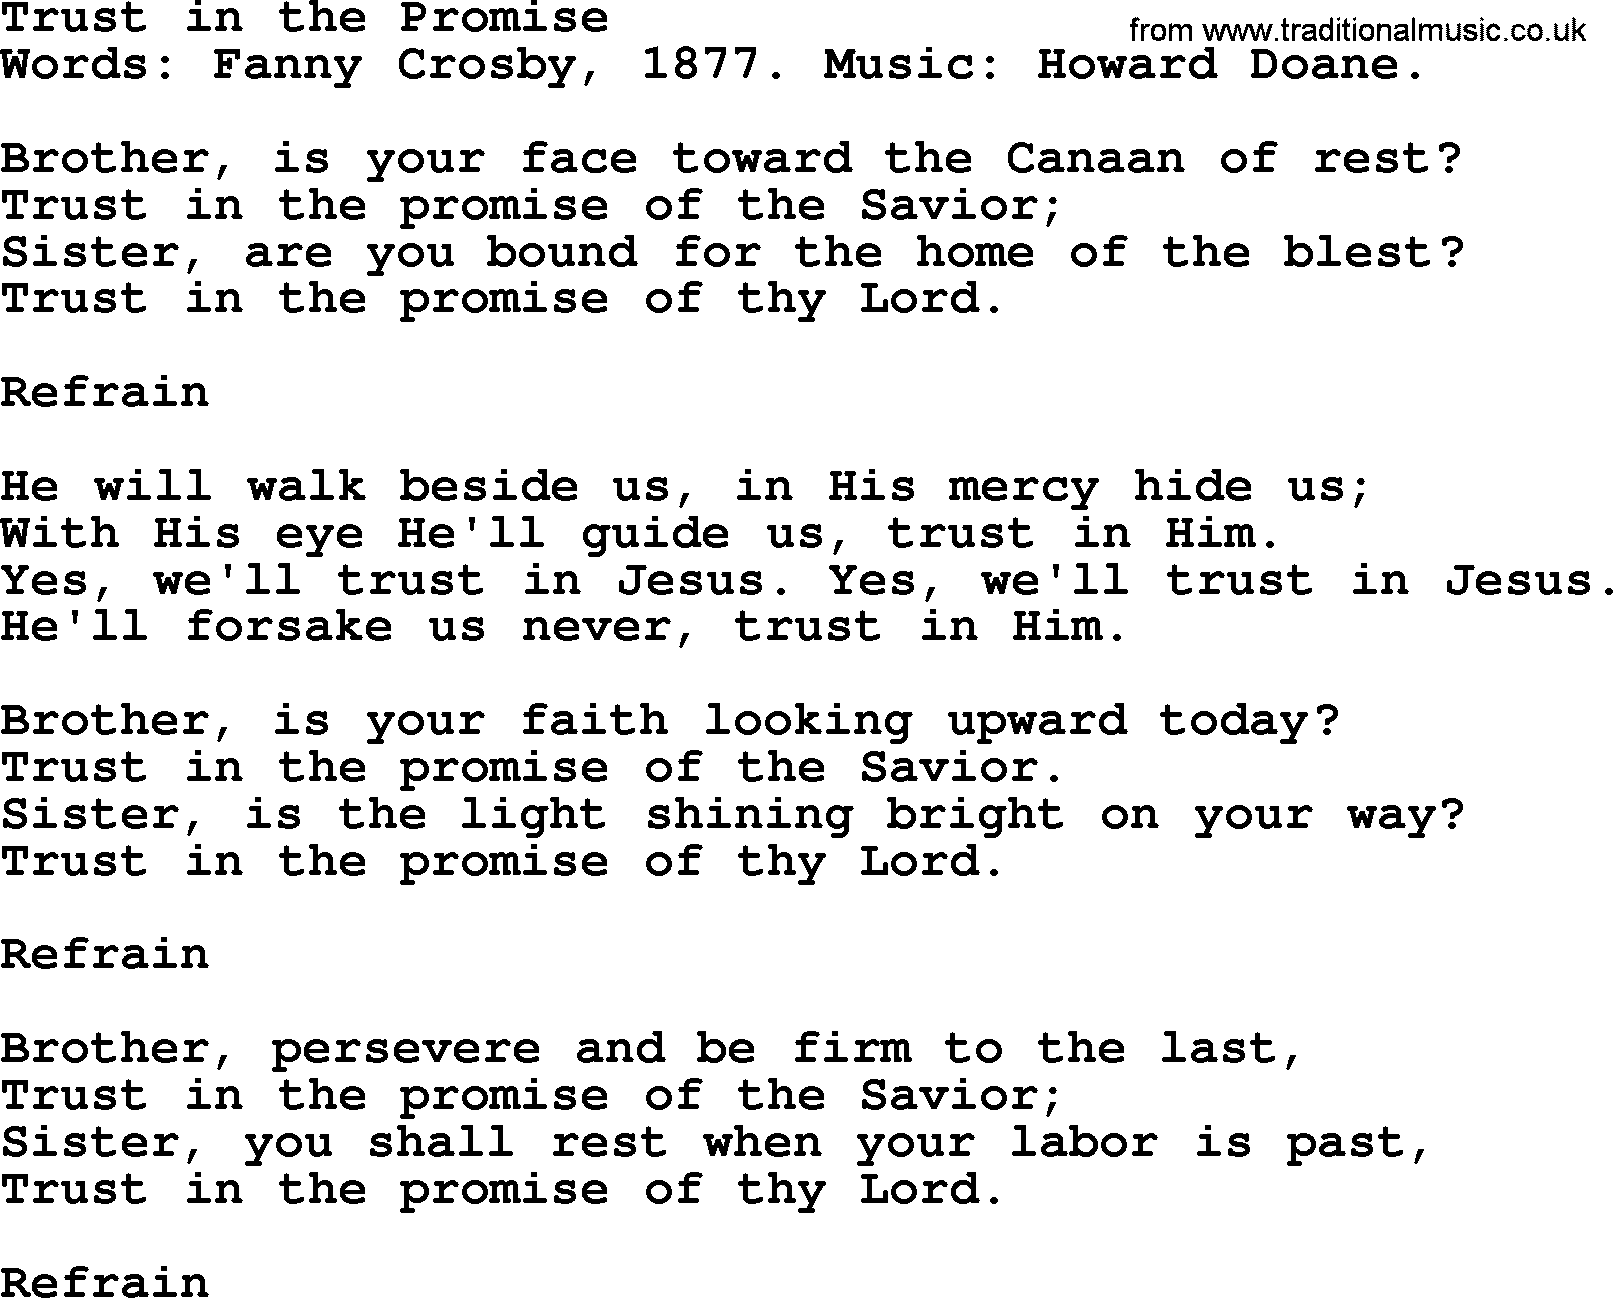 Fanny Crosby song: Trust In The Promise, lyrics